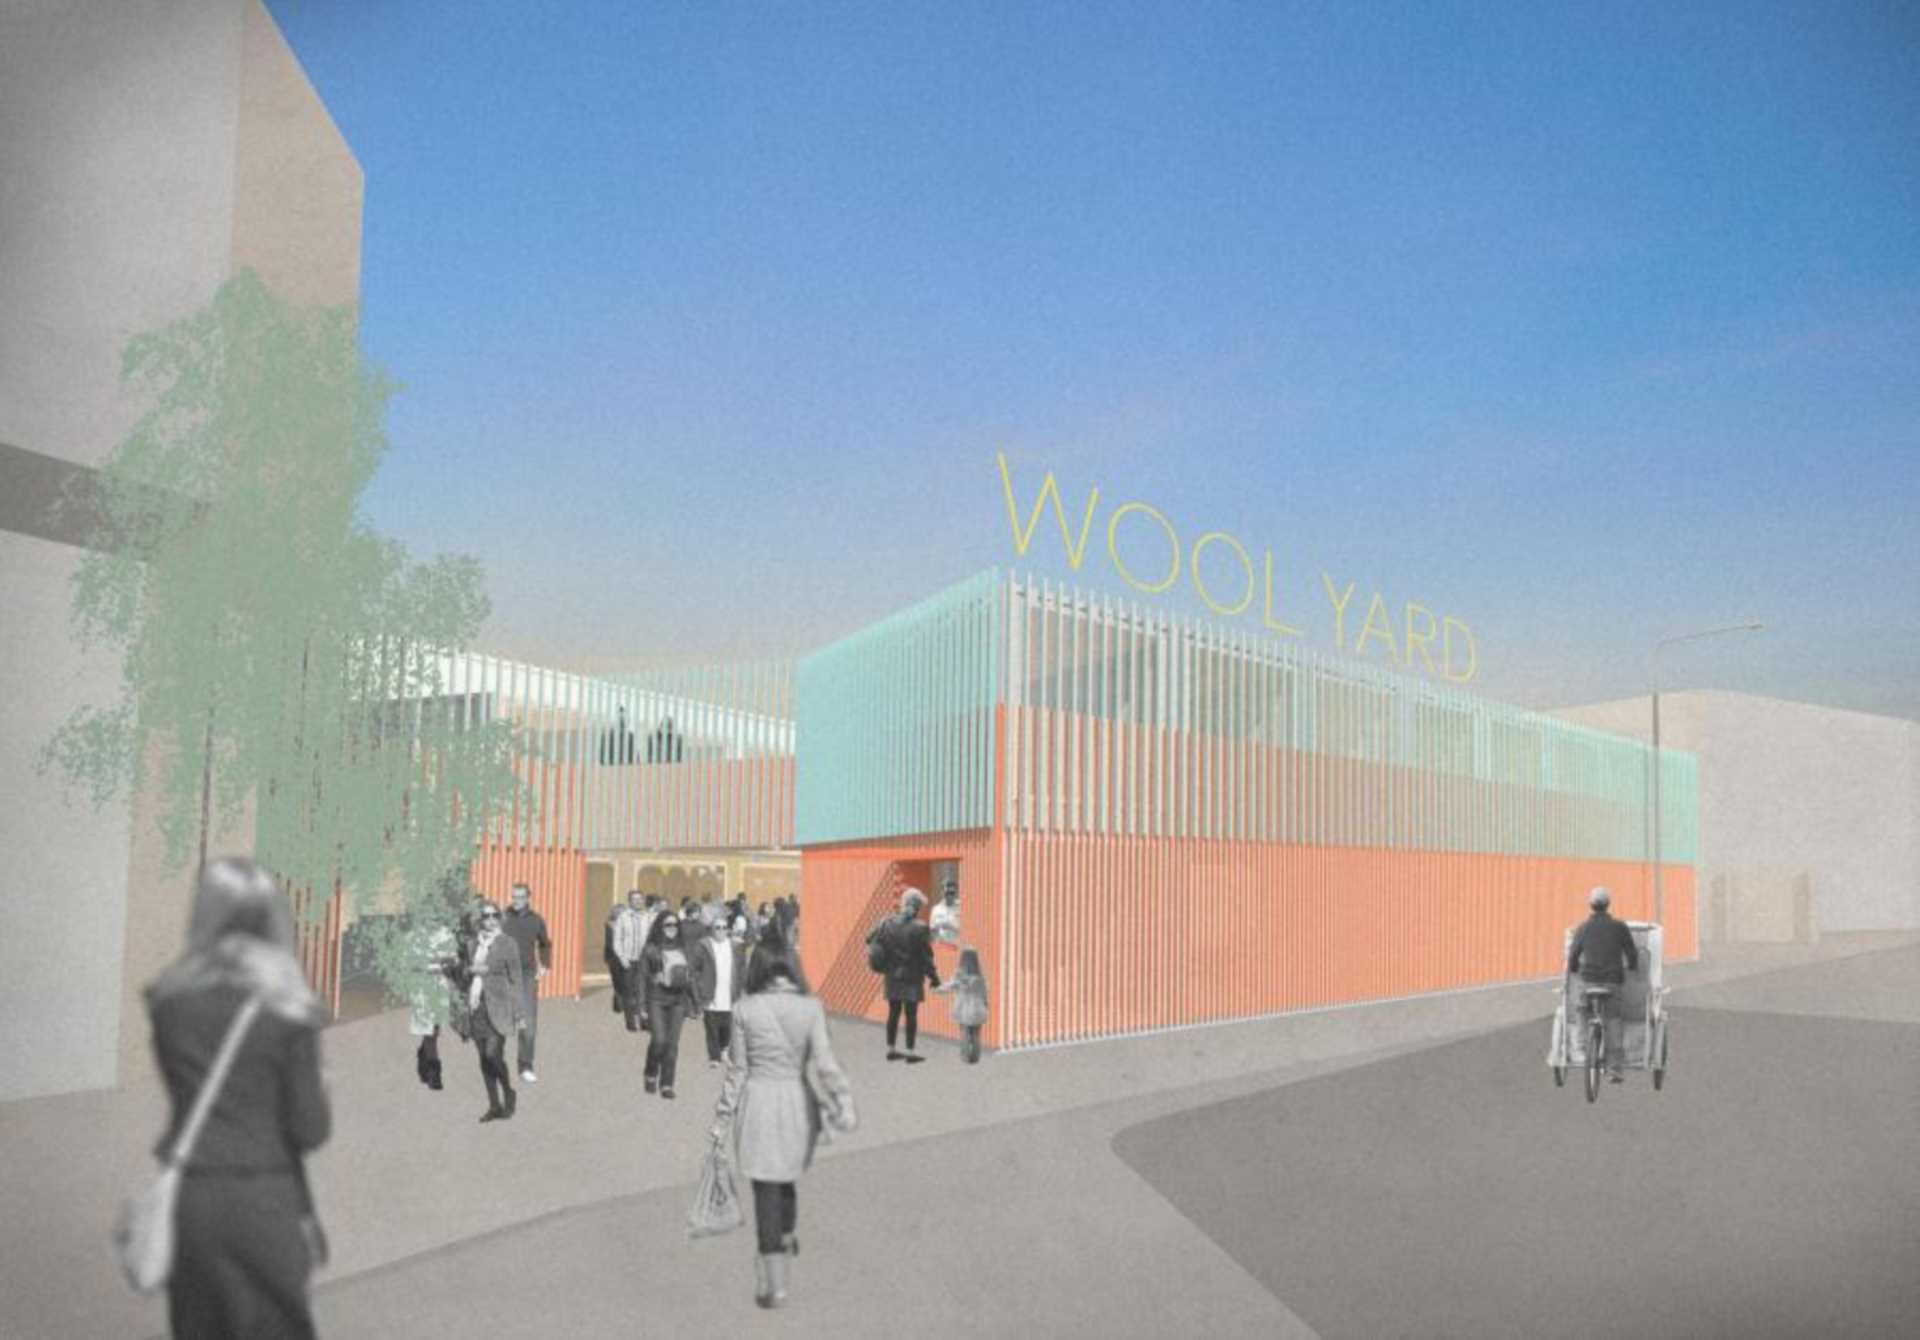 Plans for Wool Yard in Woolwich